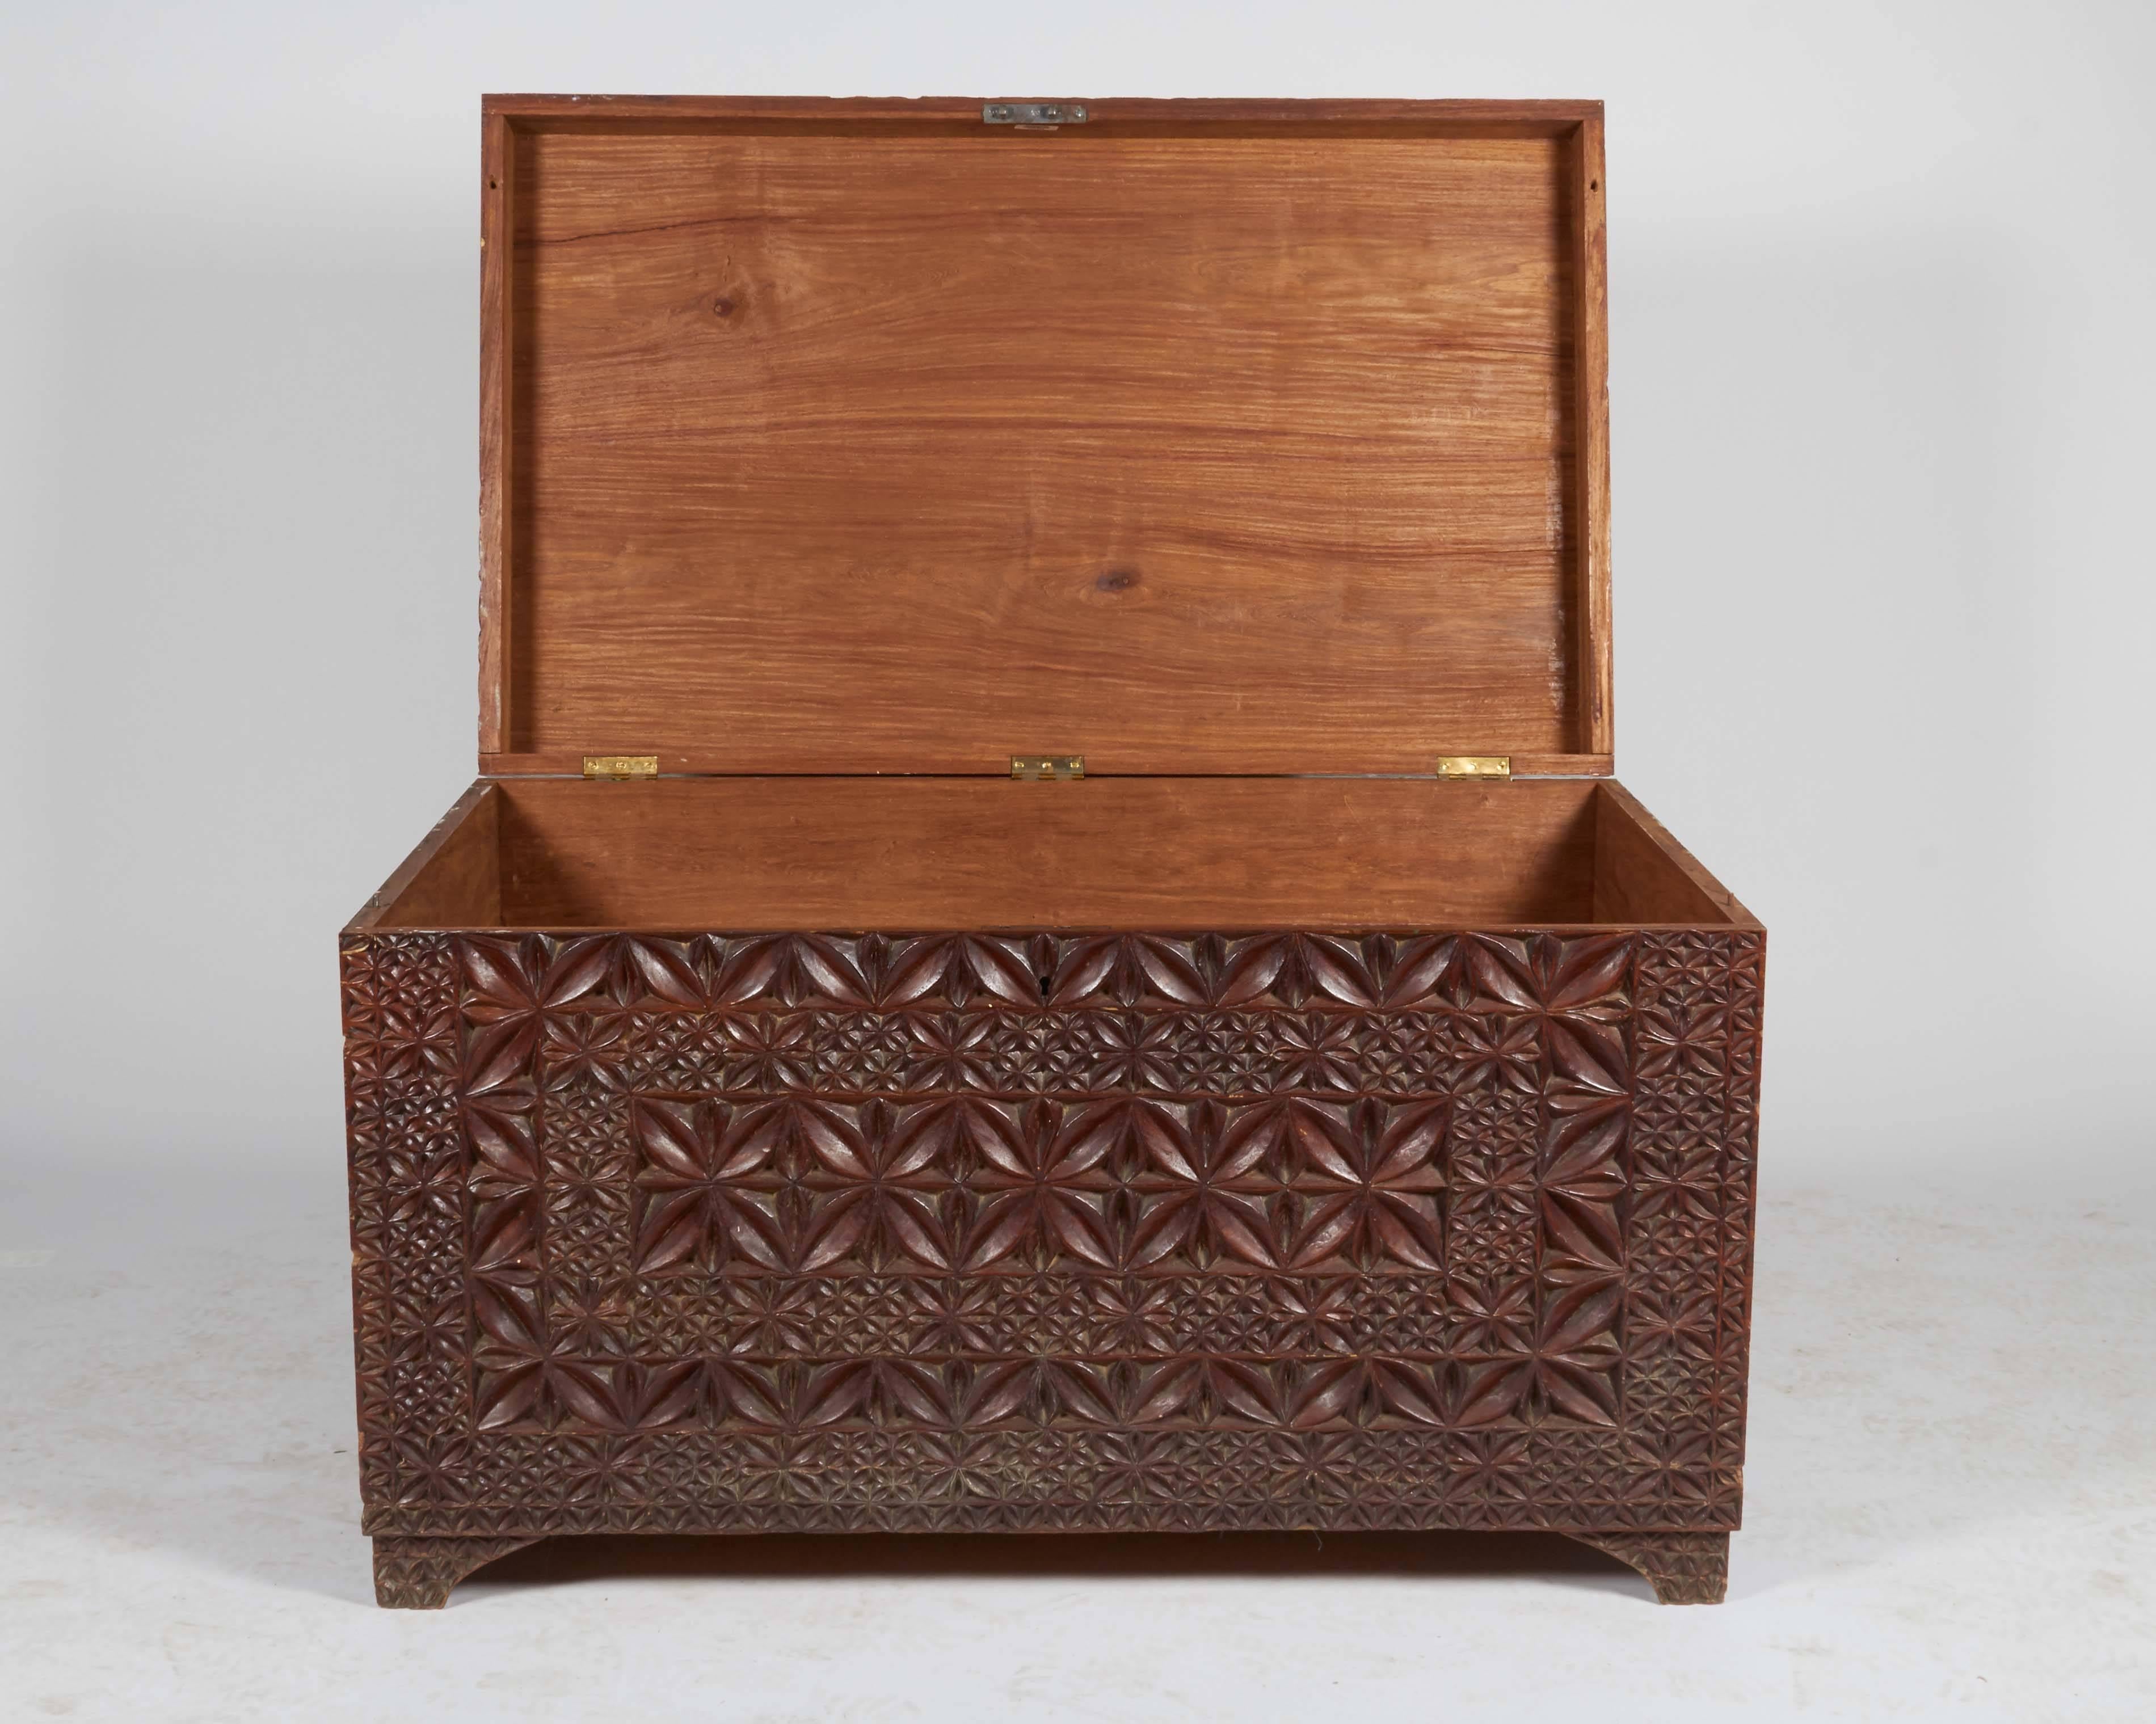 20th Century Ornate Carved Wood Trunk For Sale